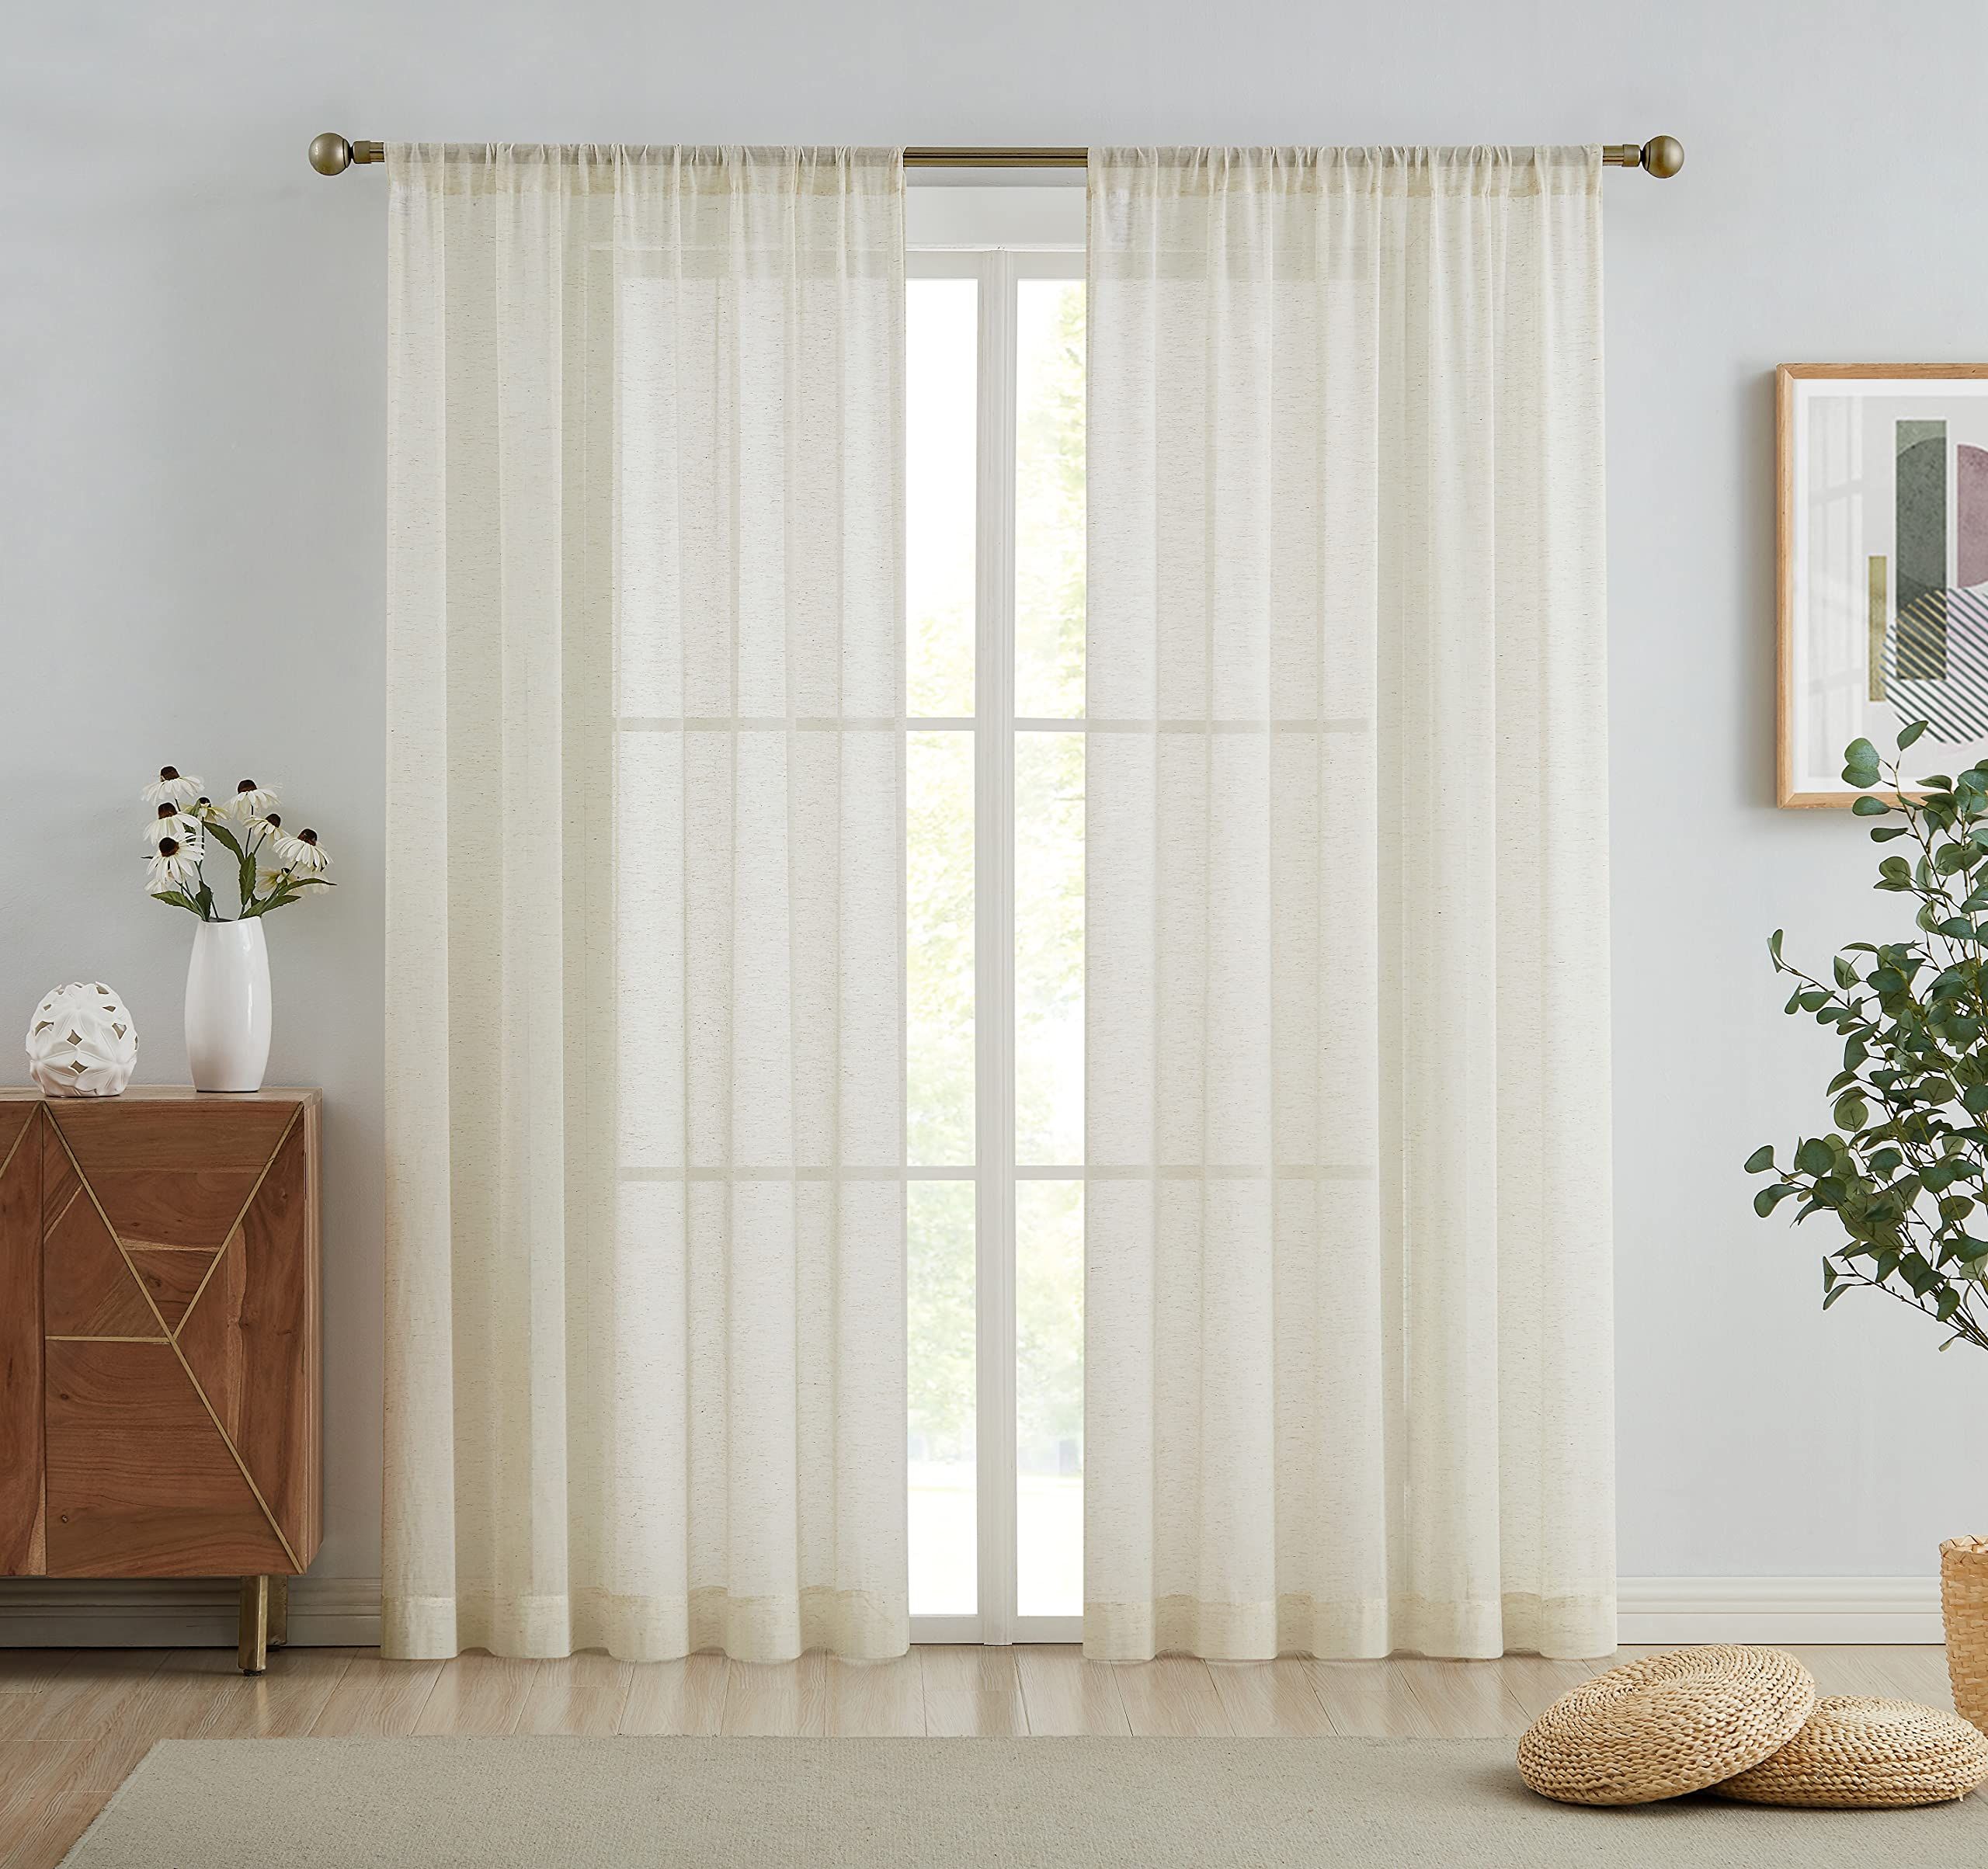 Natural Linen Textured Sheer Curtains for Living Room，Light Filtering Window Drapes Semi Sheer Rod P | Amazon (US)